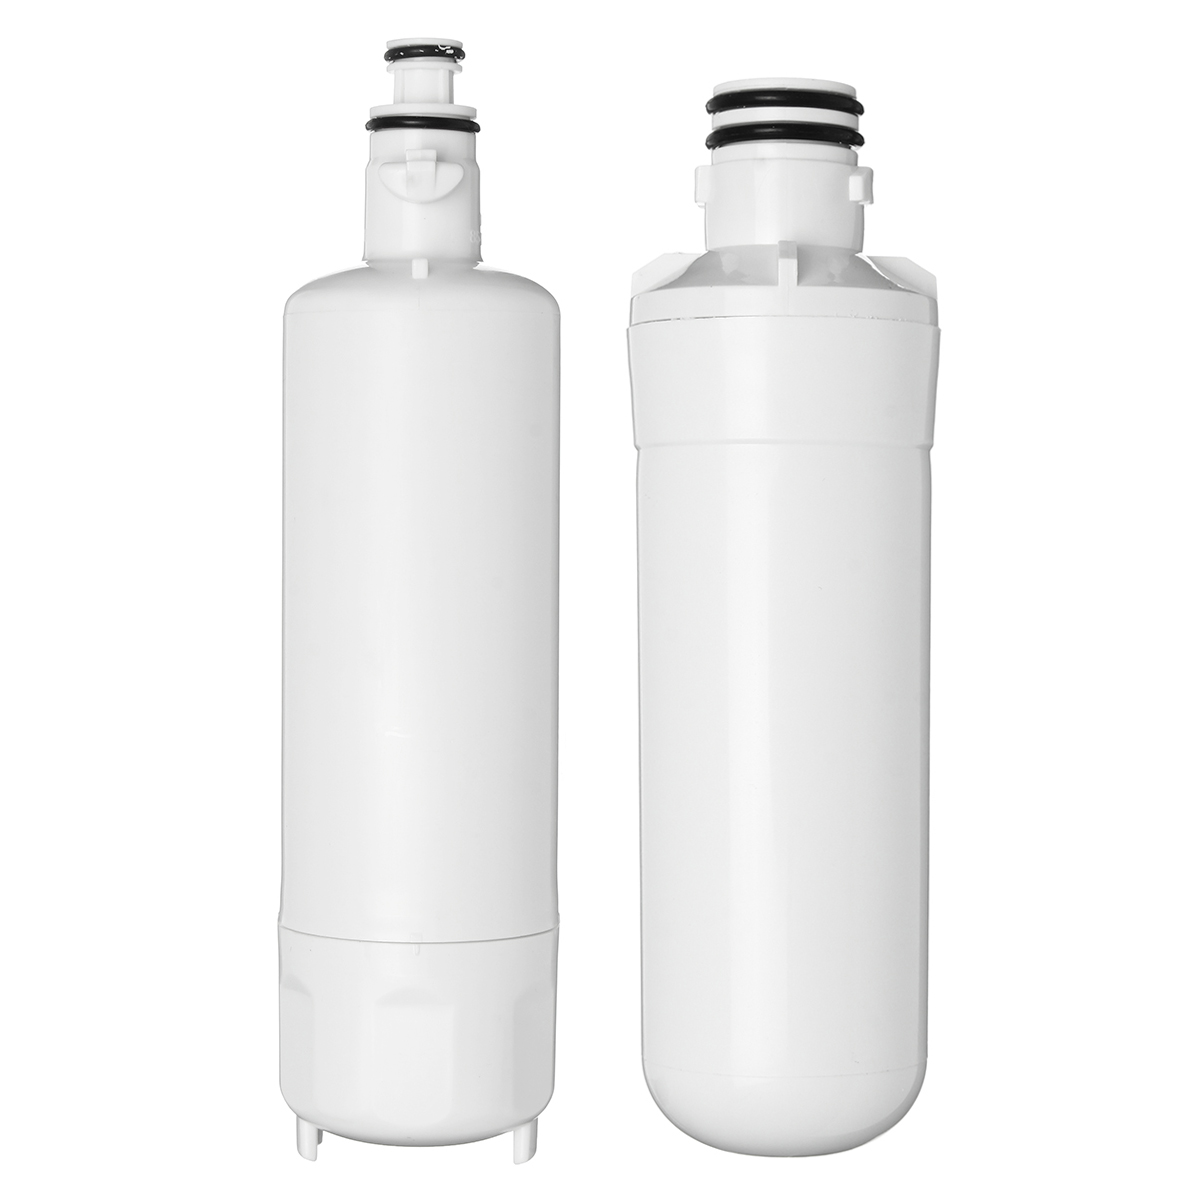 Refrigerator-Water-Filter-Replacement-Cartridge-for--LG-LT700P-LT1000P-1540596-7